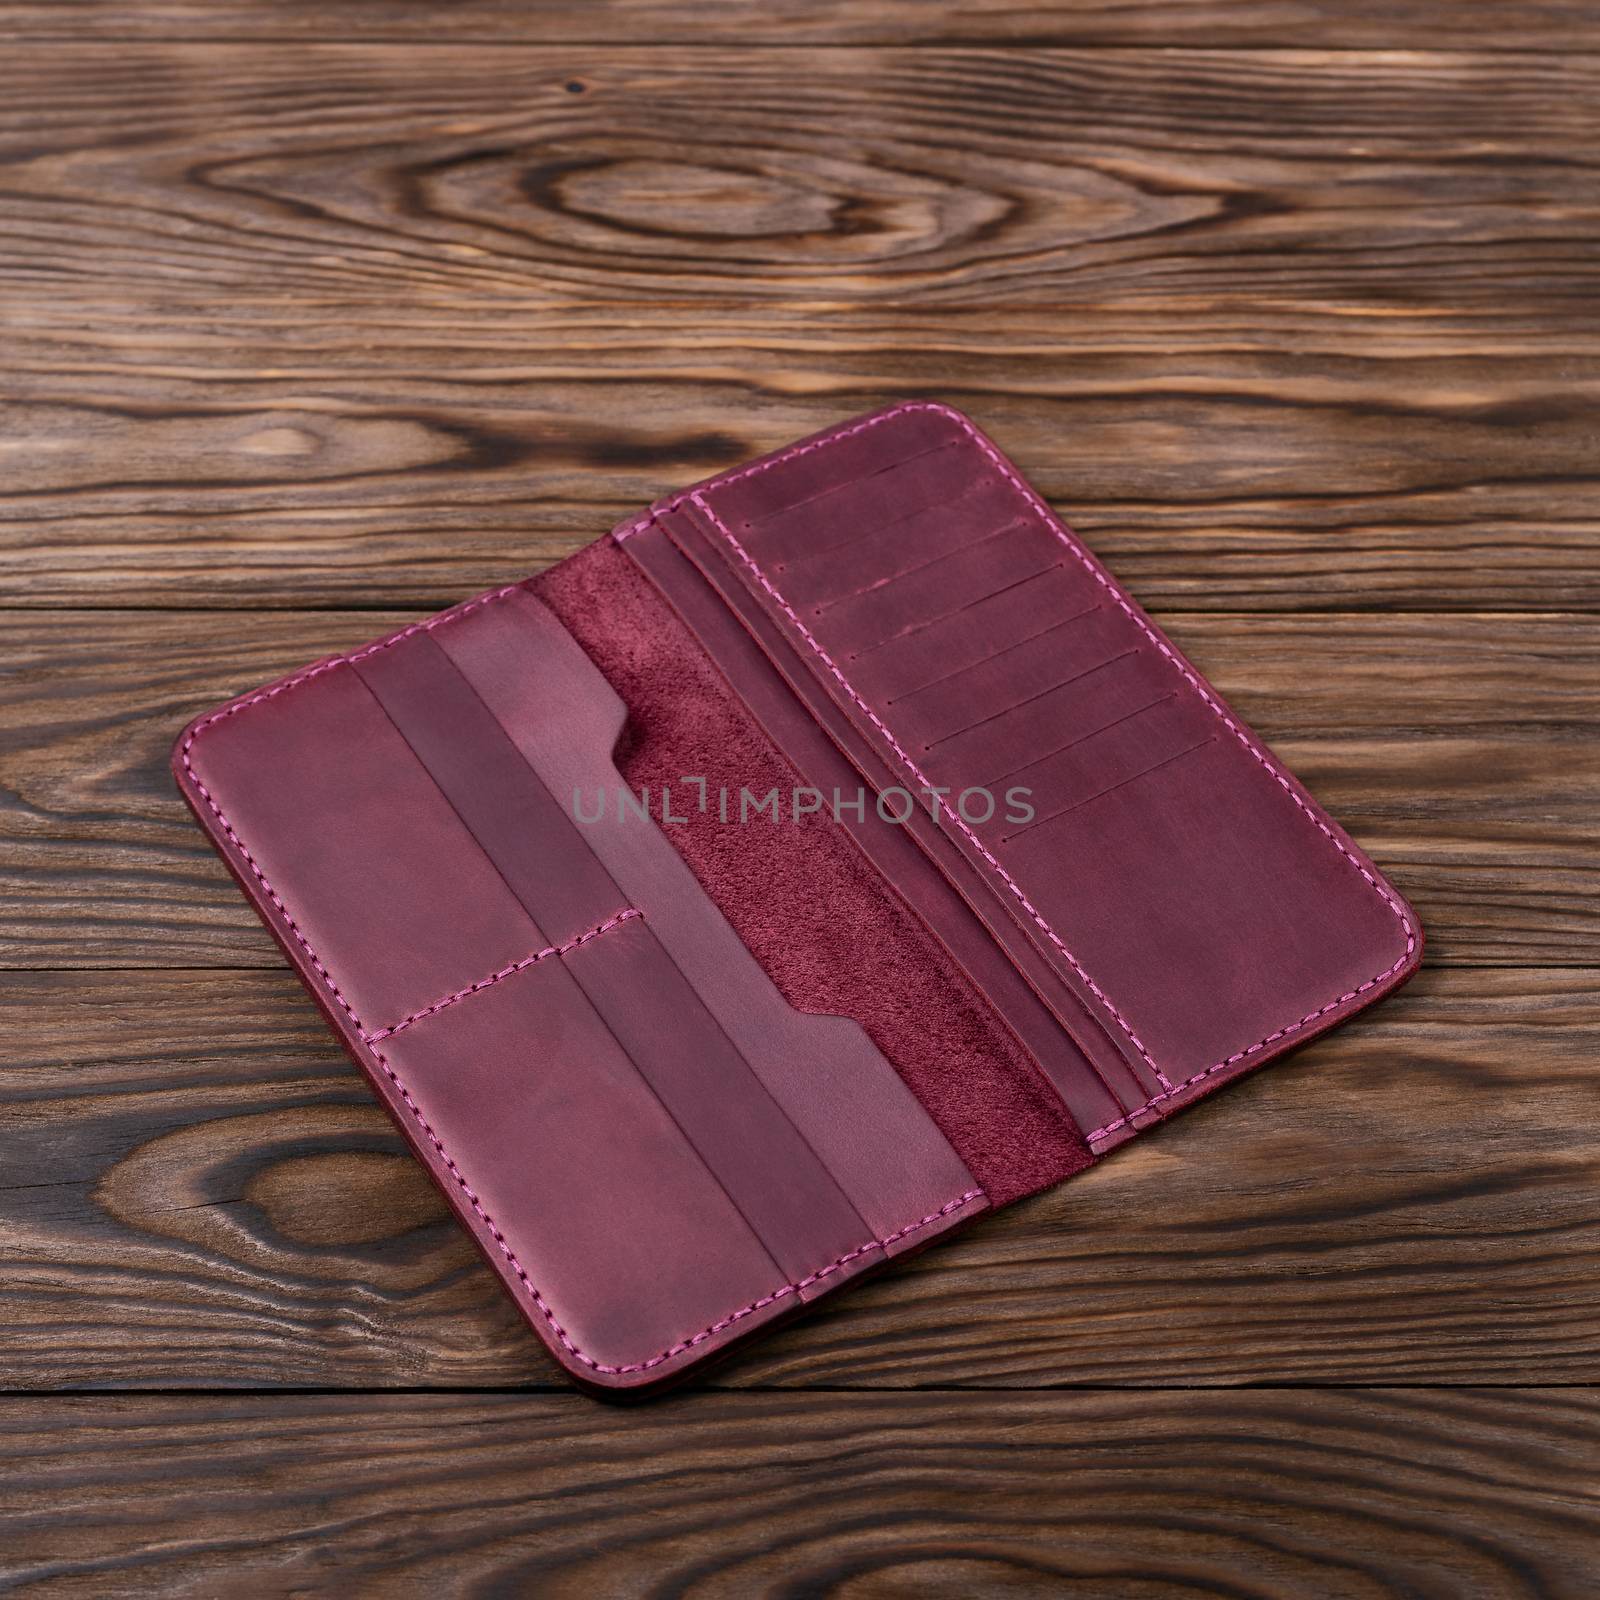 Purple color handmade leather porte-monnaie on wooden textured background. Purse is opened and empty. Side view. Stock photo of luxury accessories.